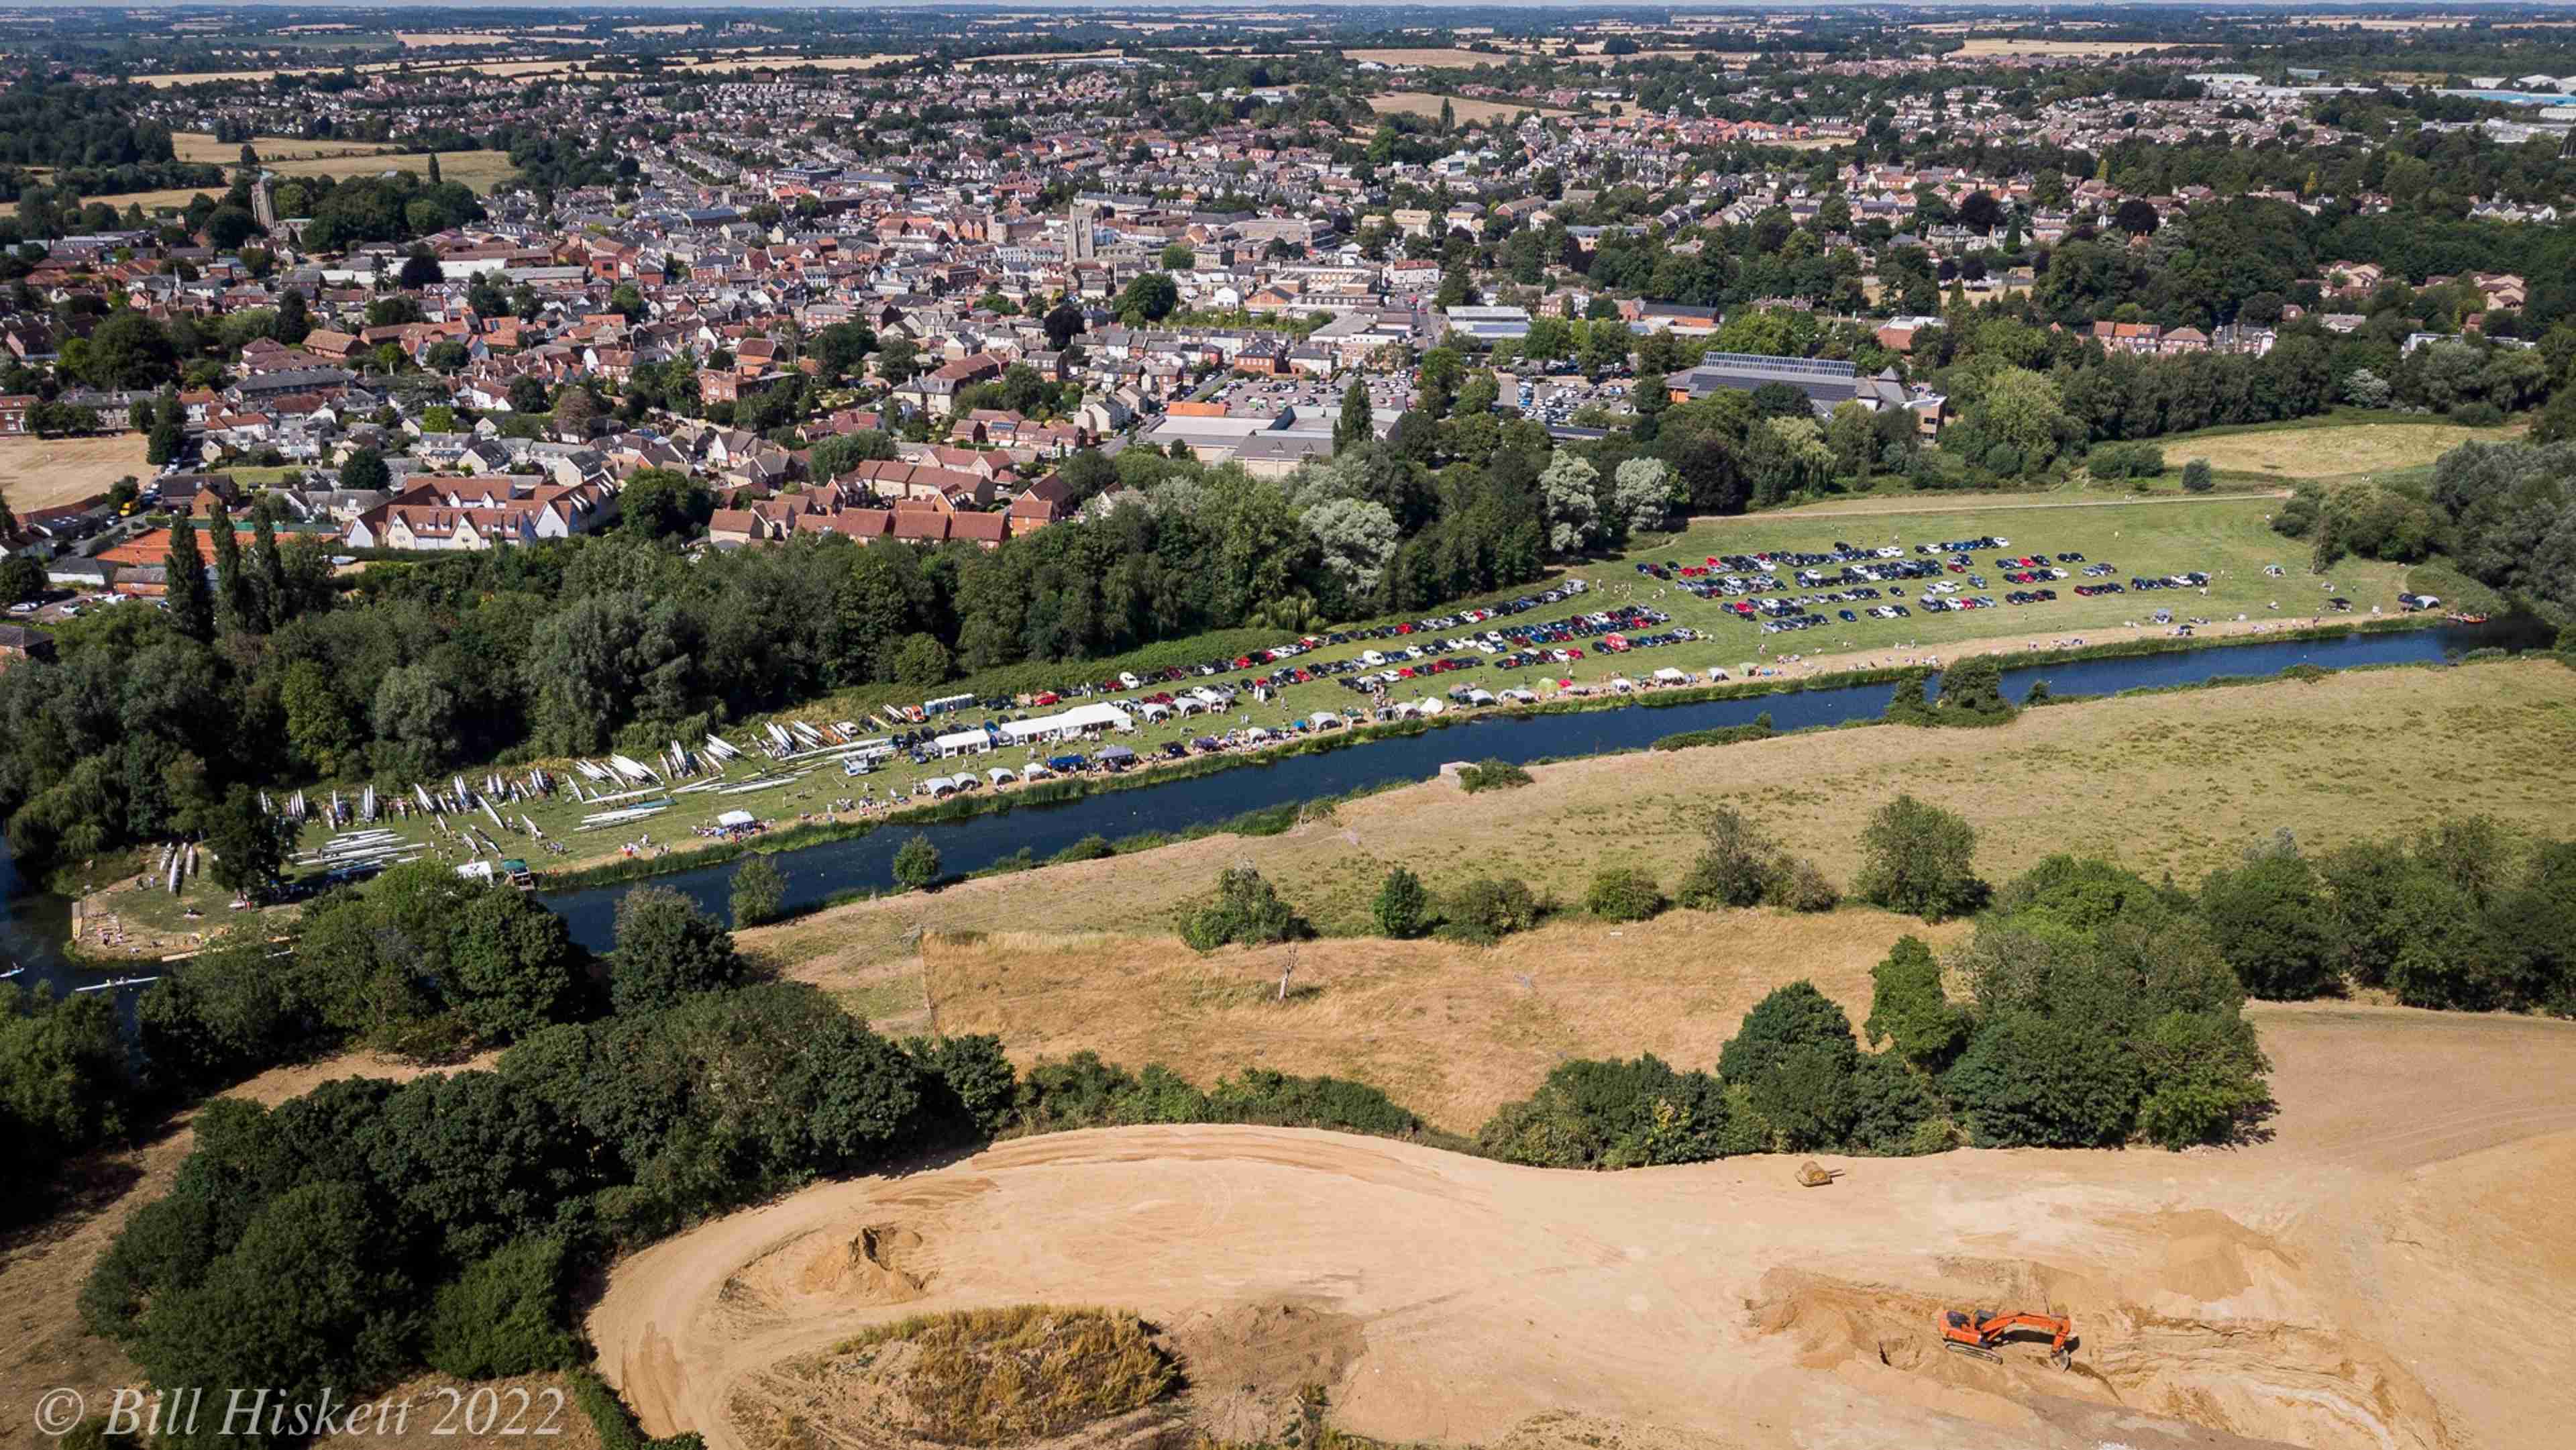 An aerial shot of the meadow, where there are boats, cars, white tents and spectators, with Sudbury town in the background.